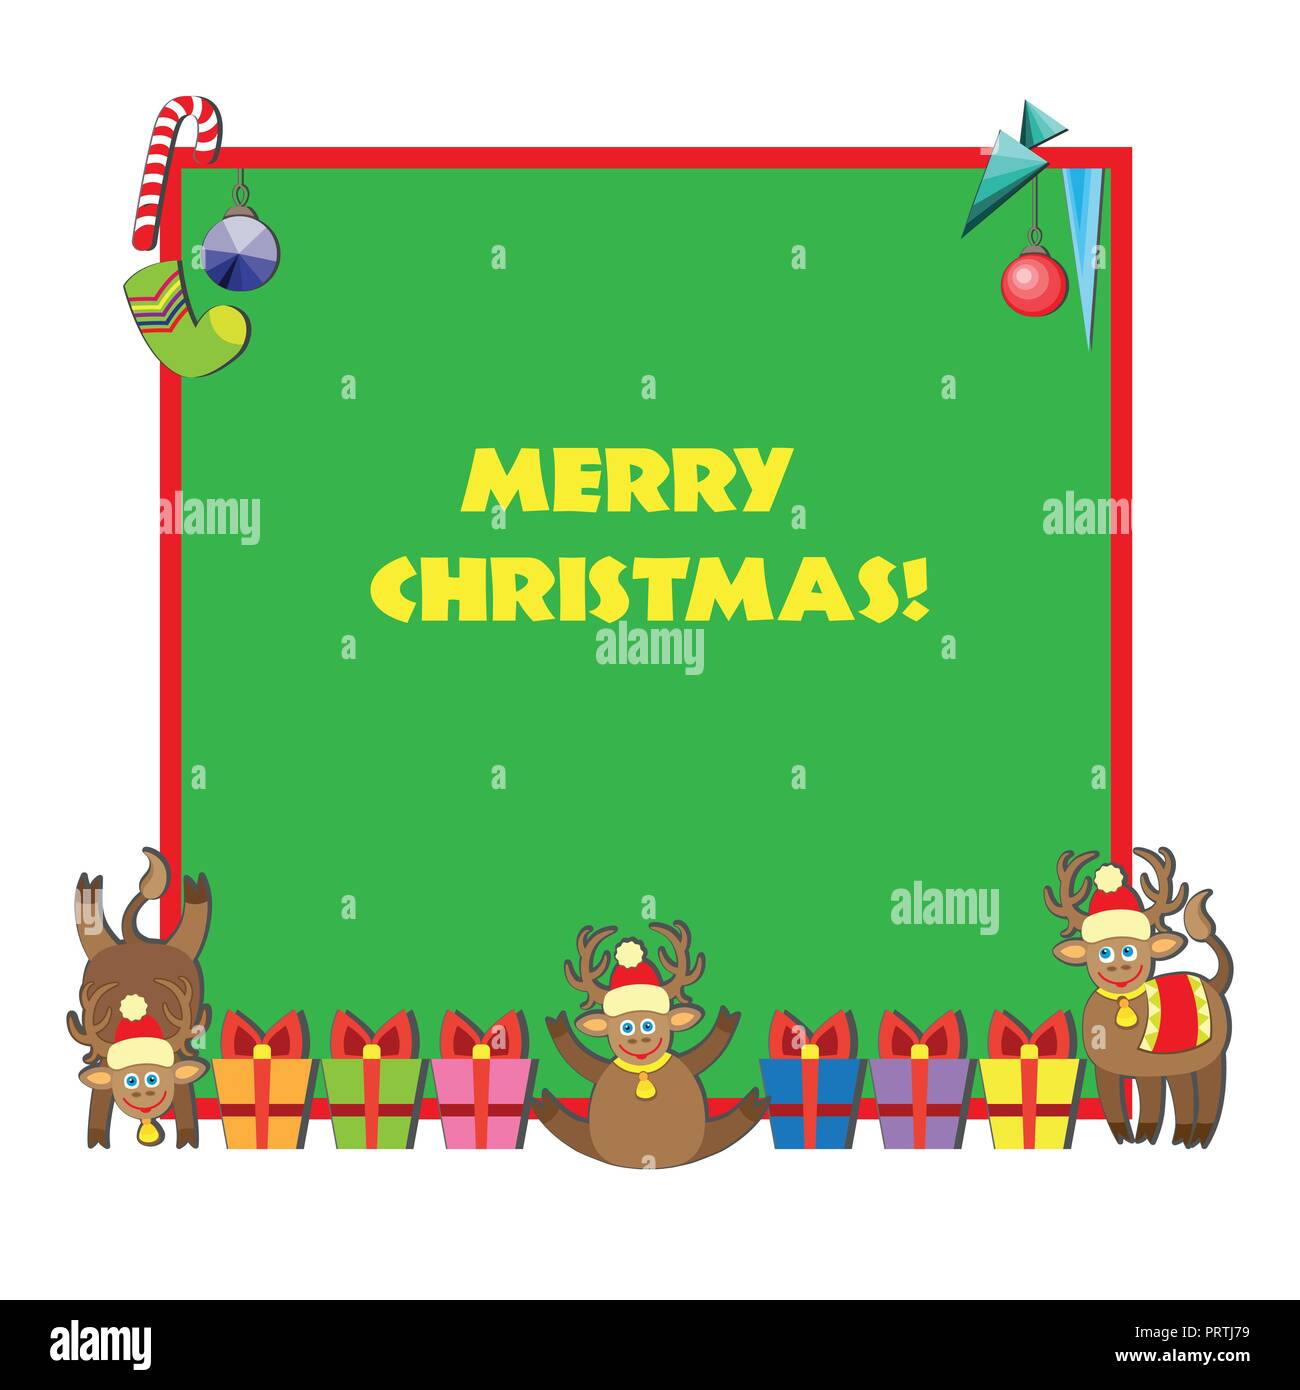 Abstract design Christmas card illustration for text. Stock Vector